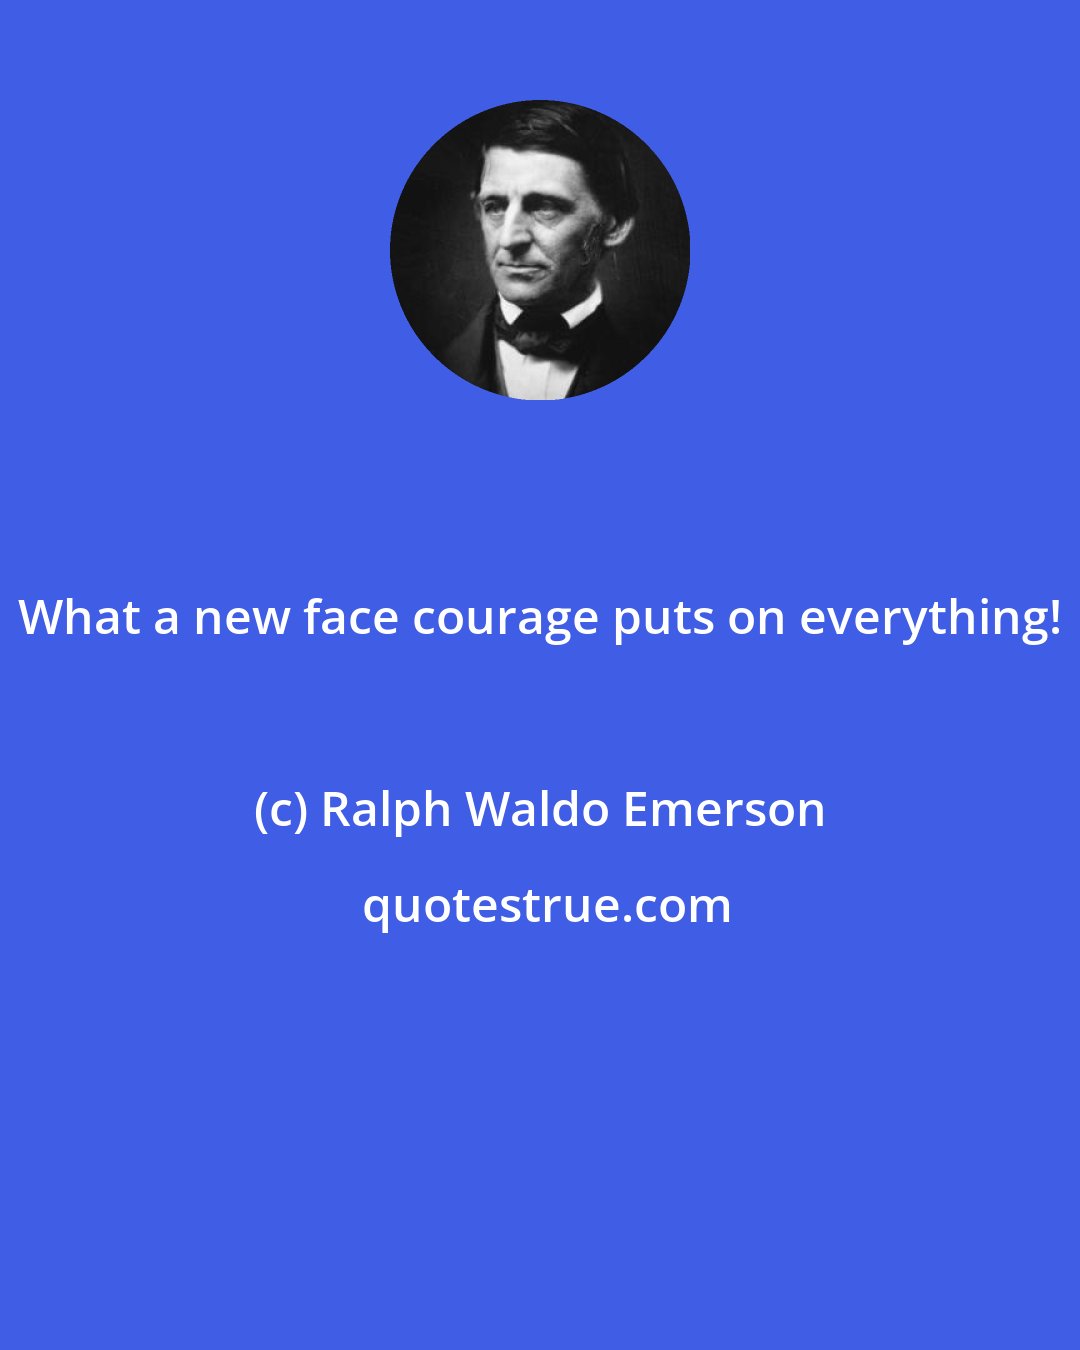 Ralph Waldo Emerson: What a new face courage puts on everything!